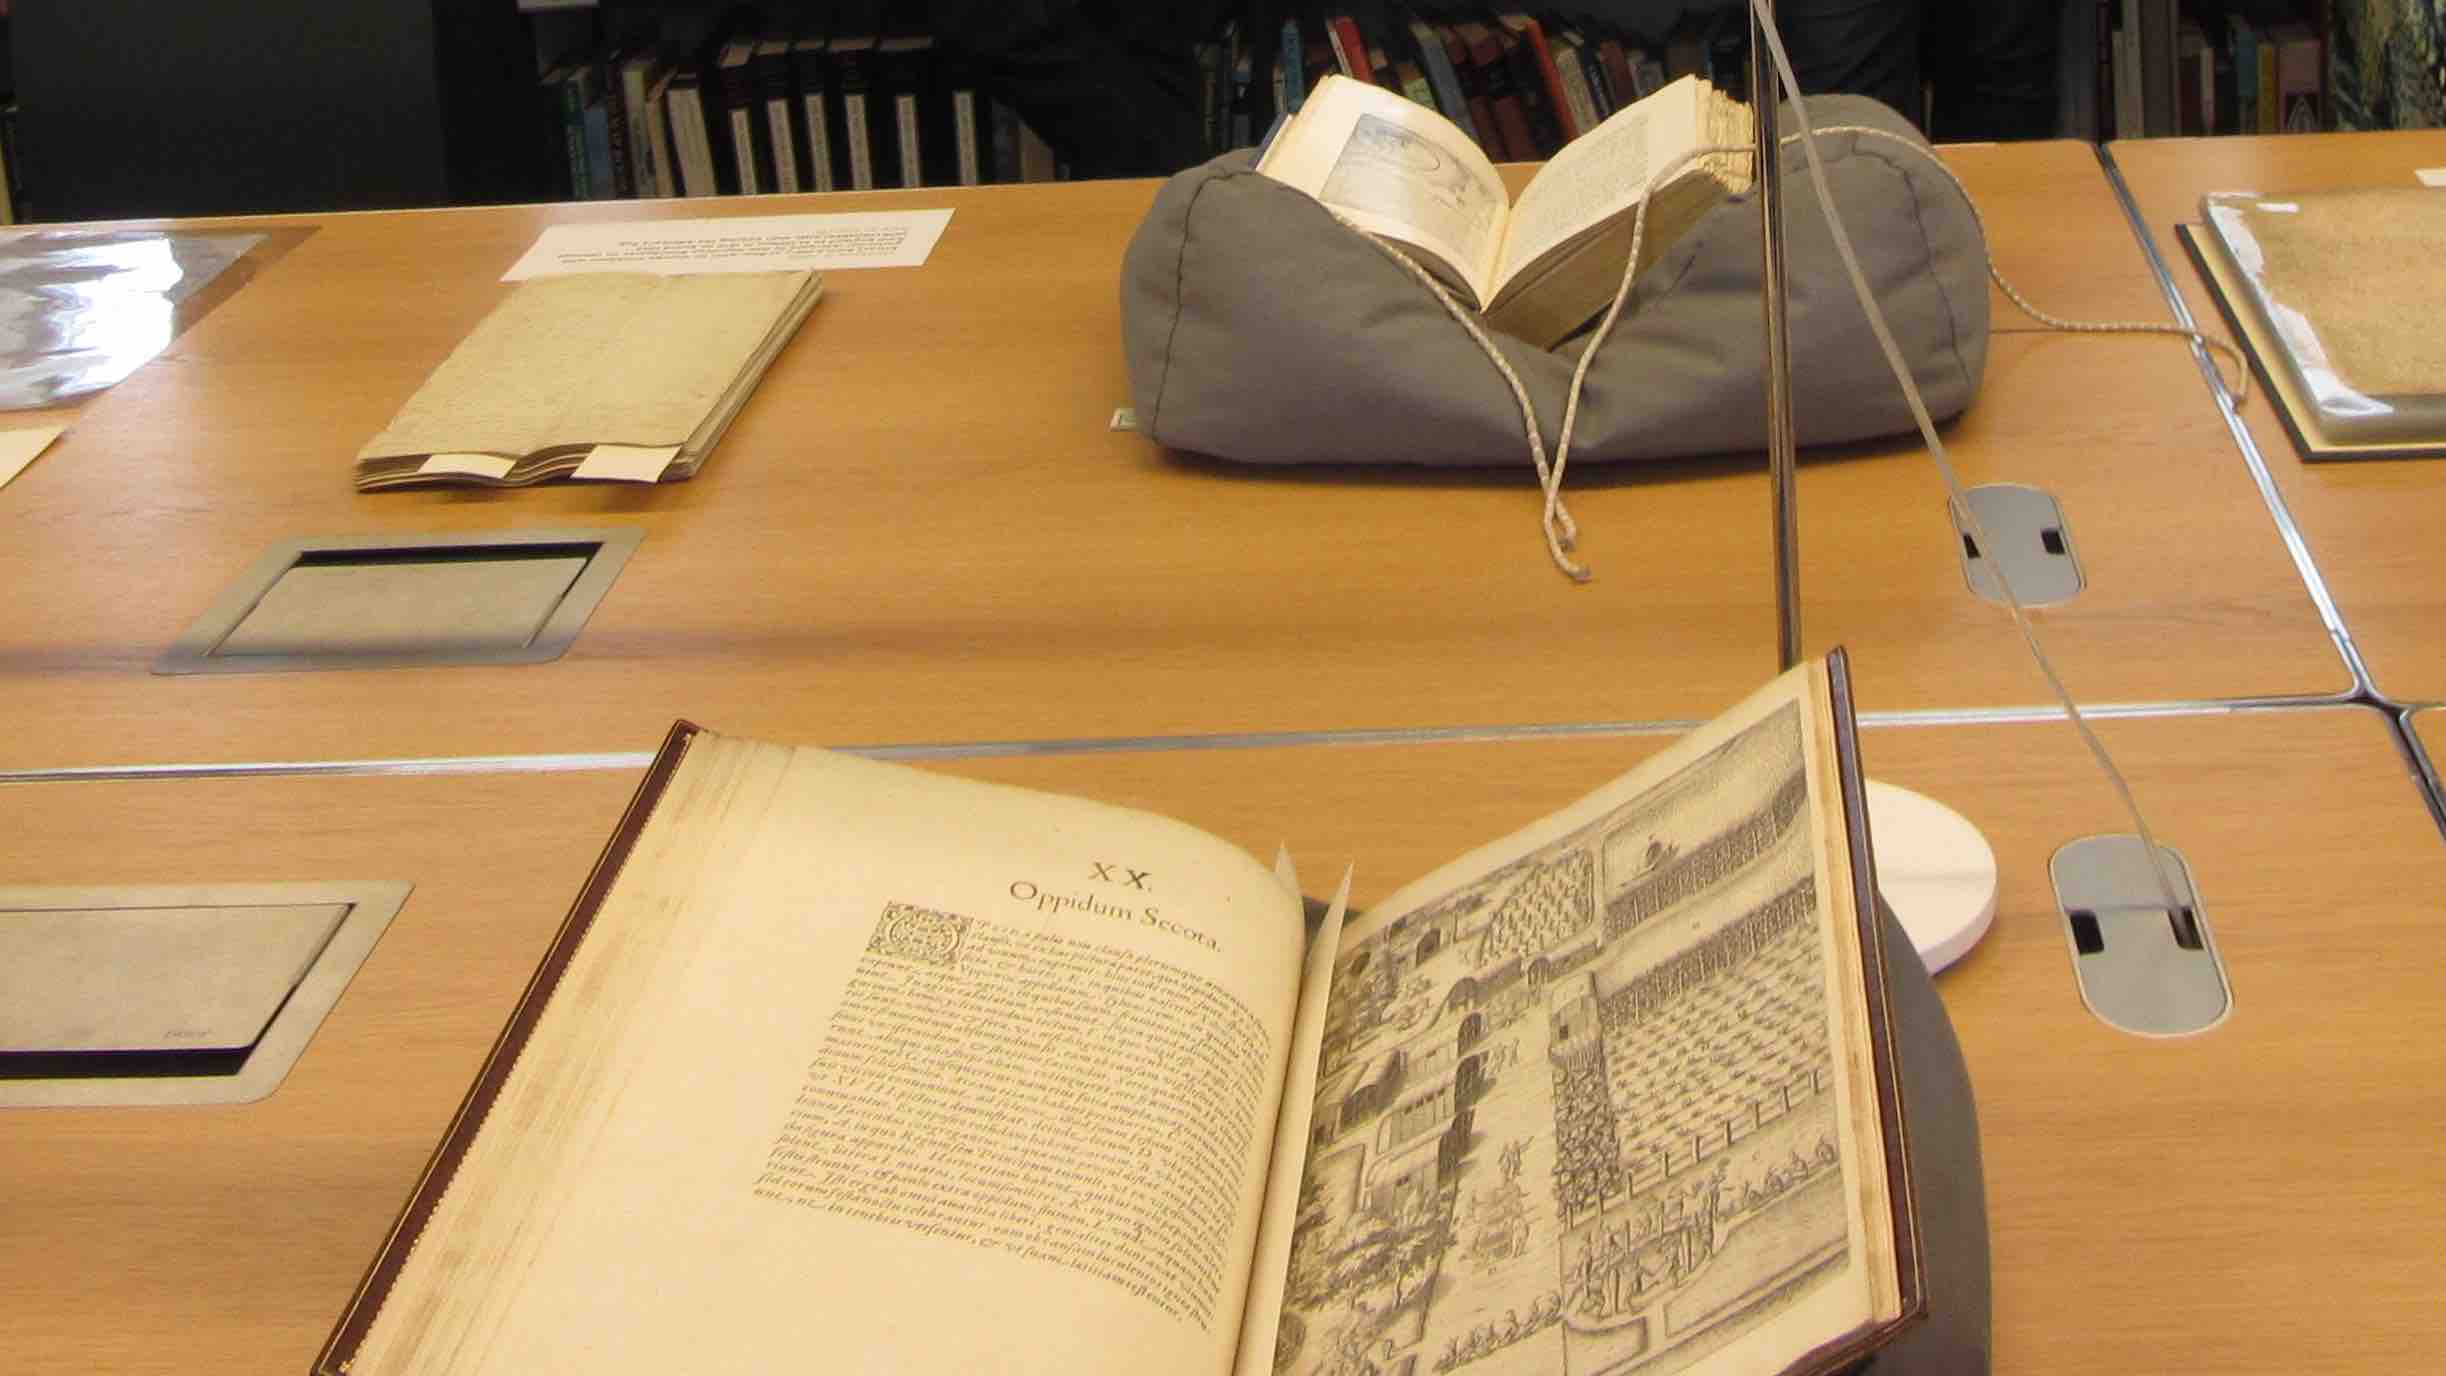 Cropped image of objects from Caird Library and Archive on the table